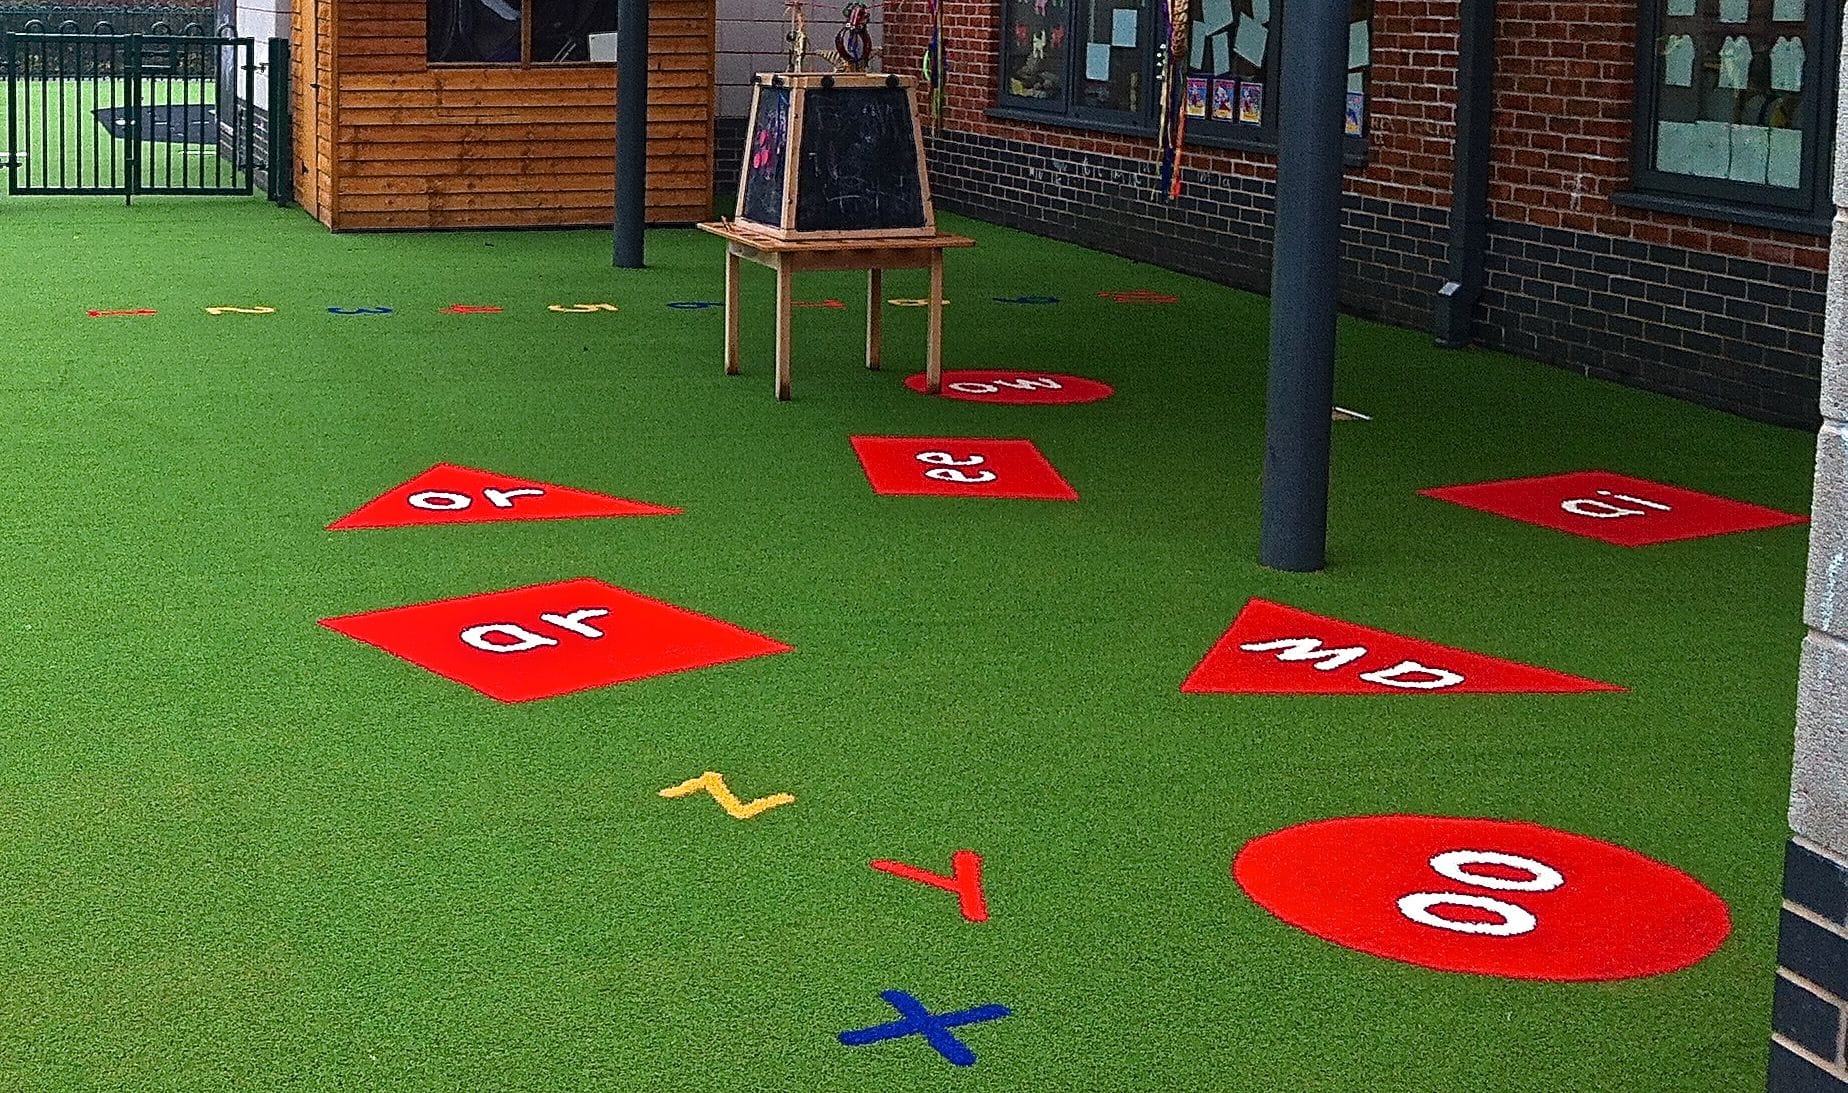 red phonics tiles and letters cut into green playground area